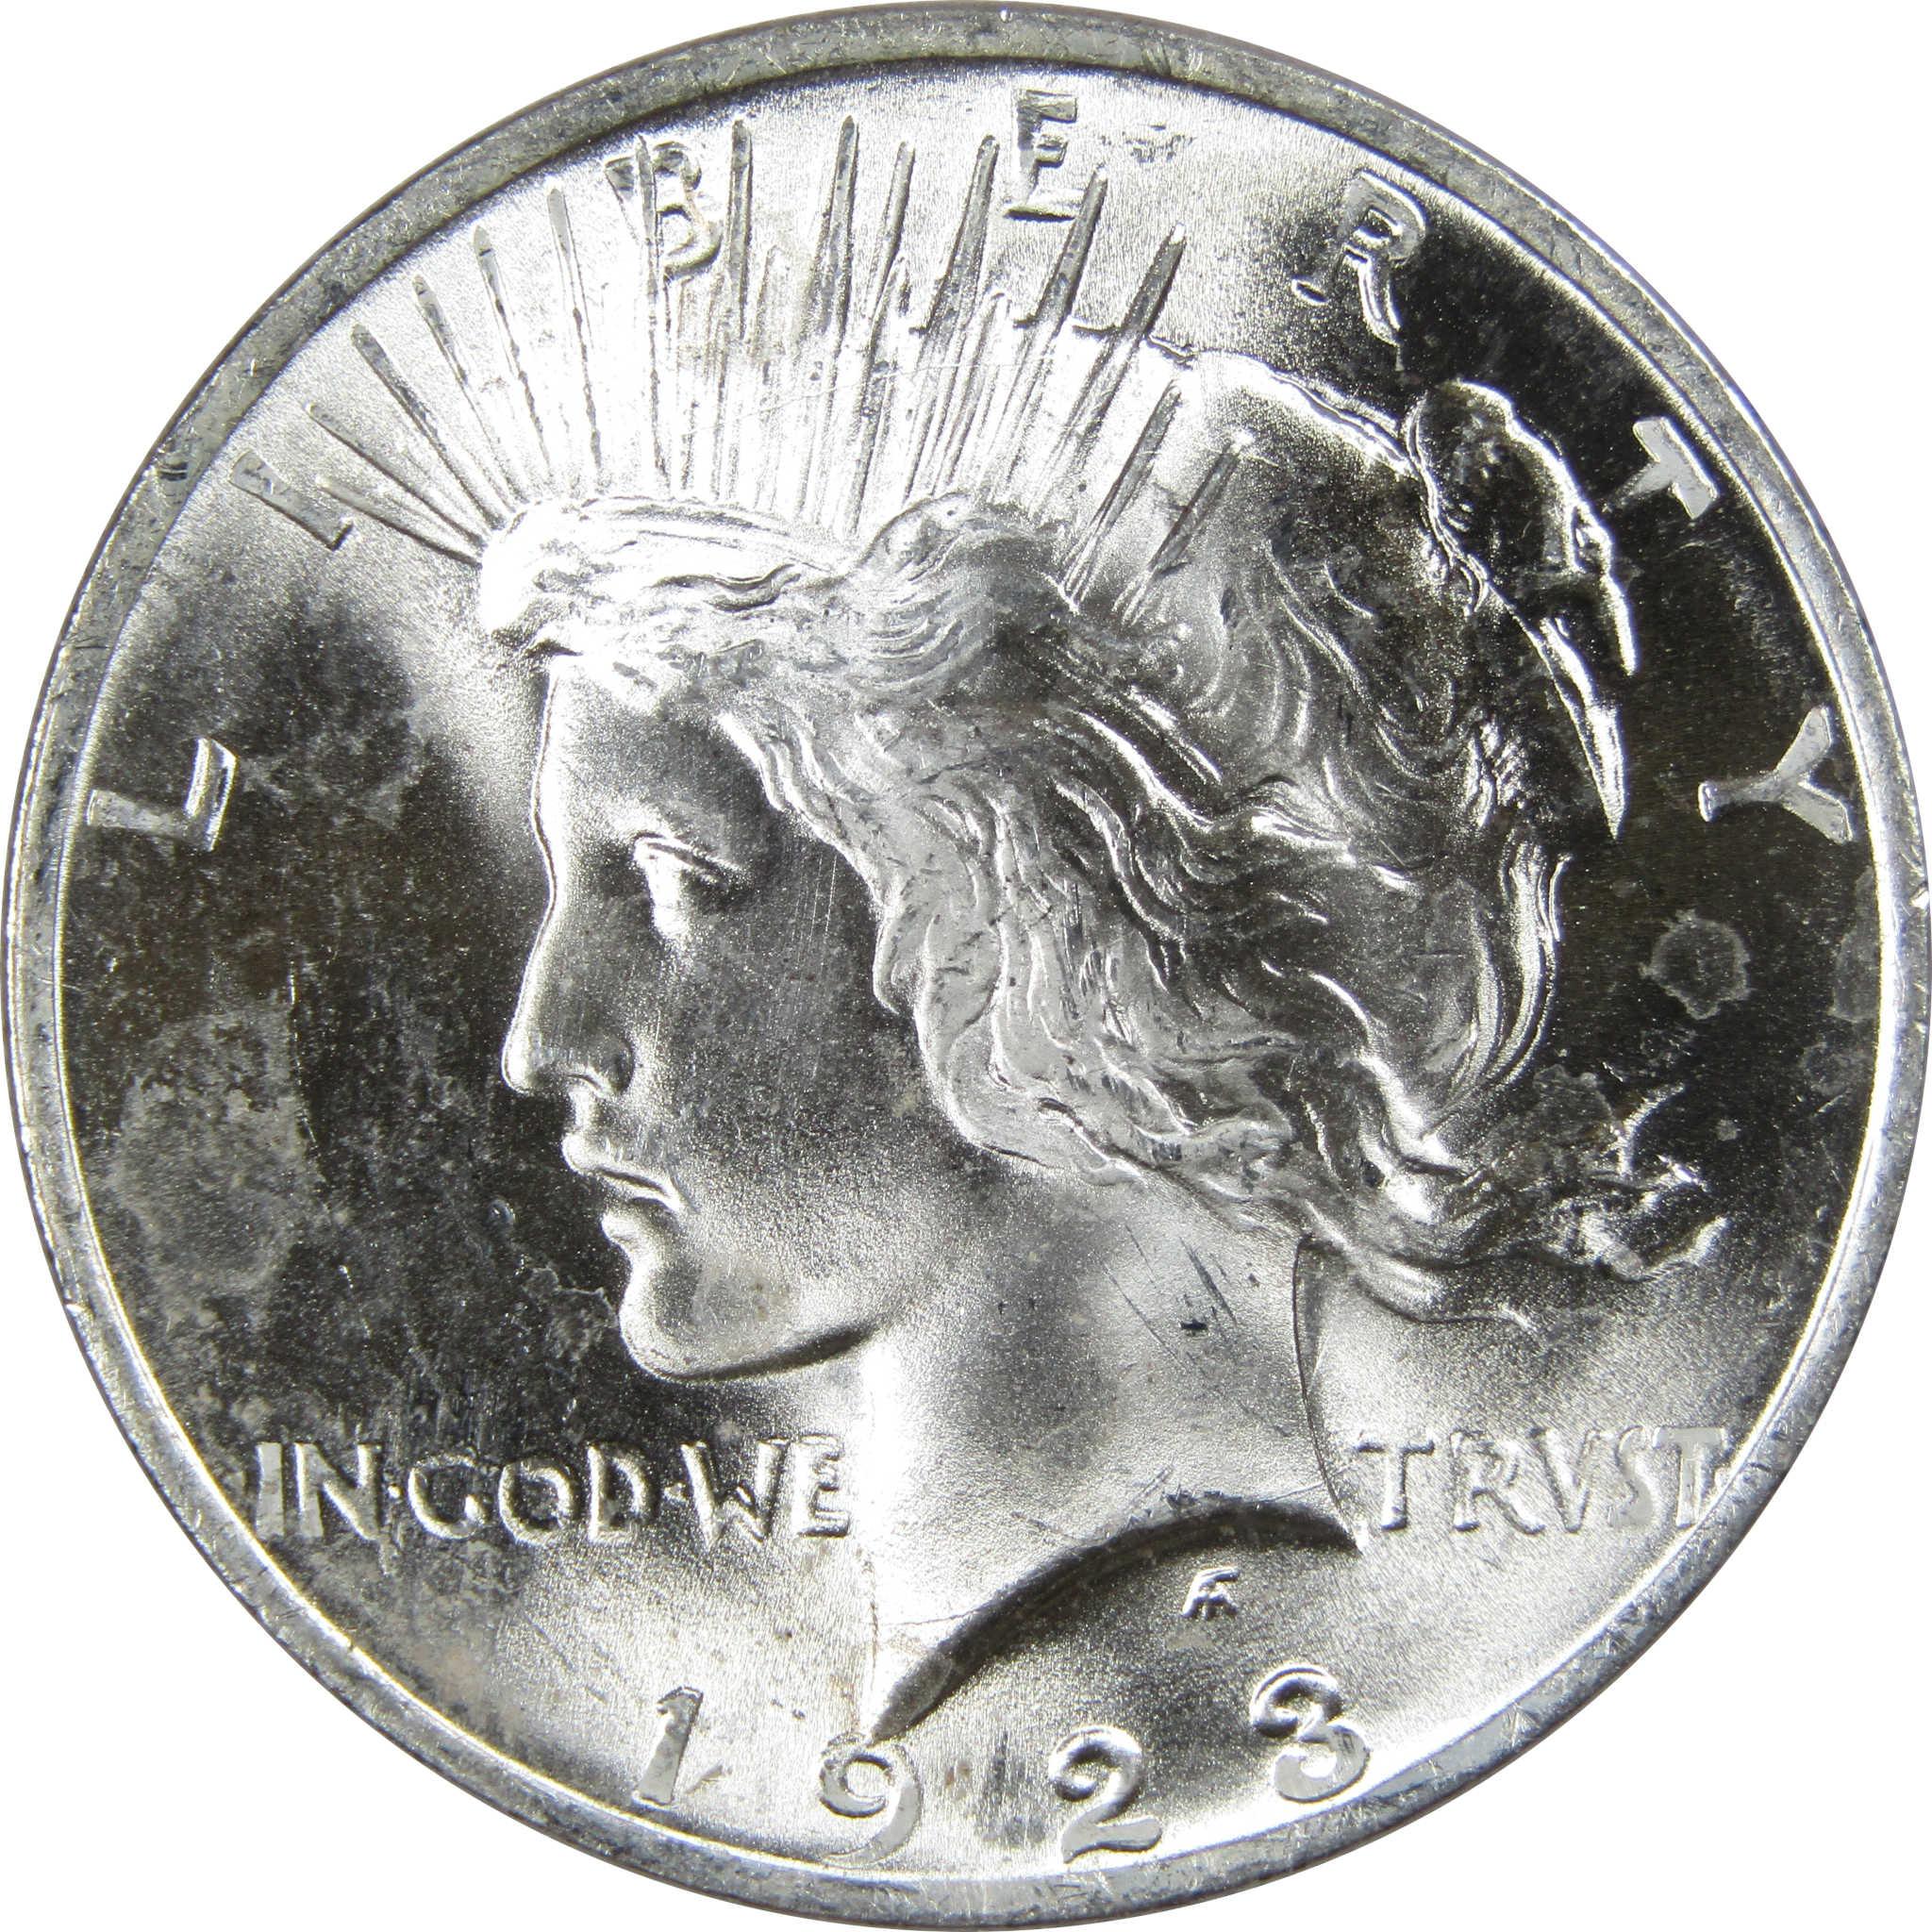 1923 Peace Dollar BU Choice Uncirculated Mint State 90% Silver $1 US Coin